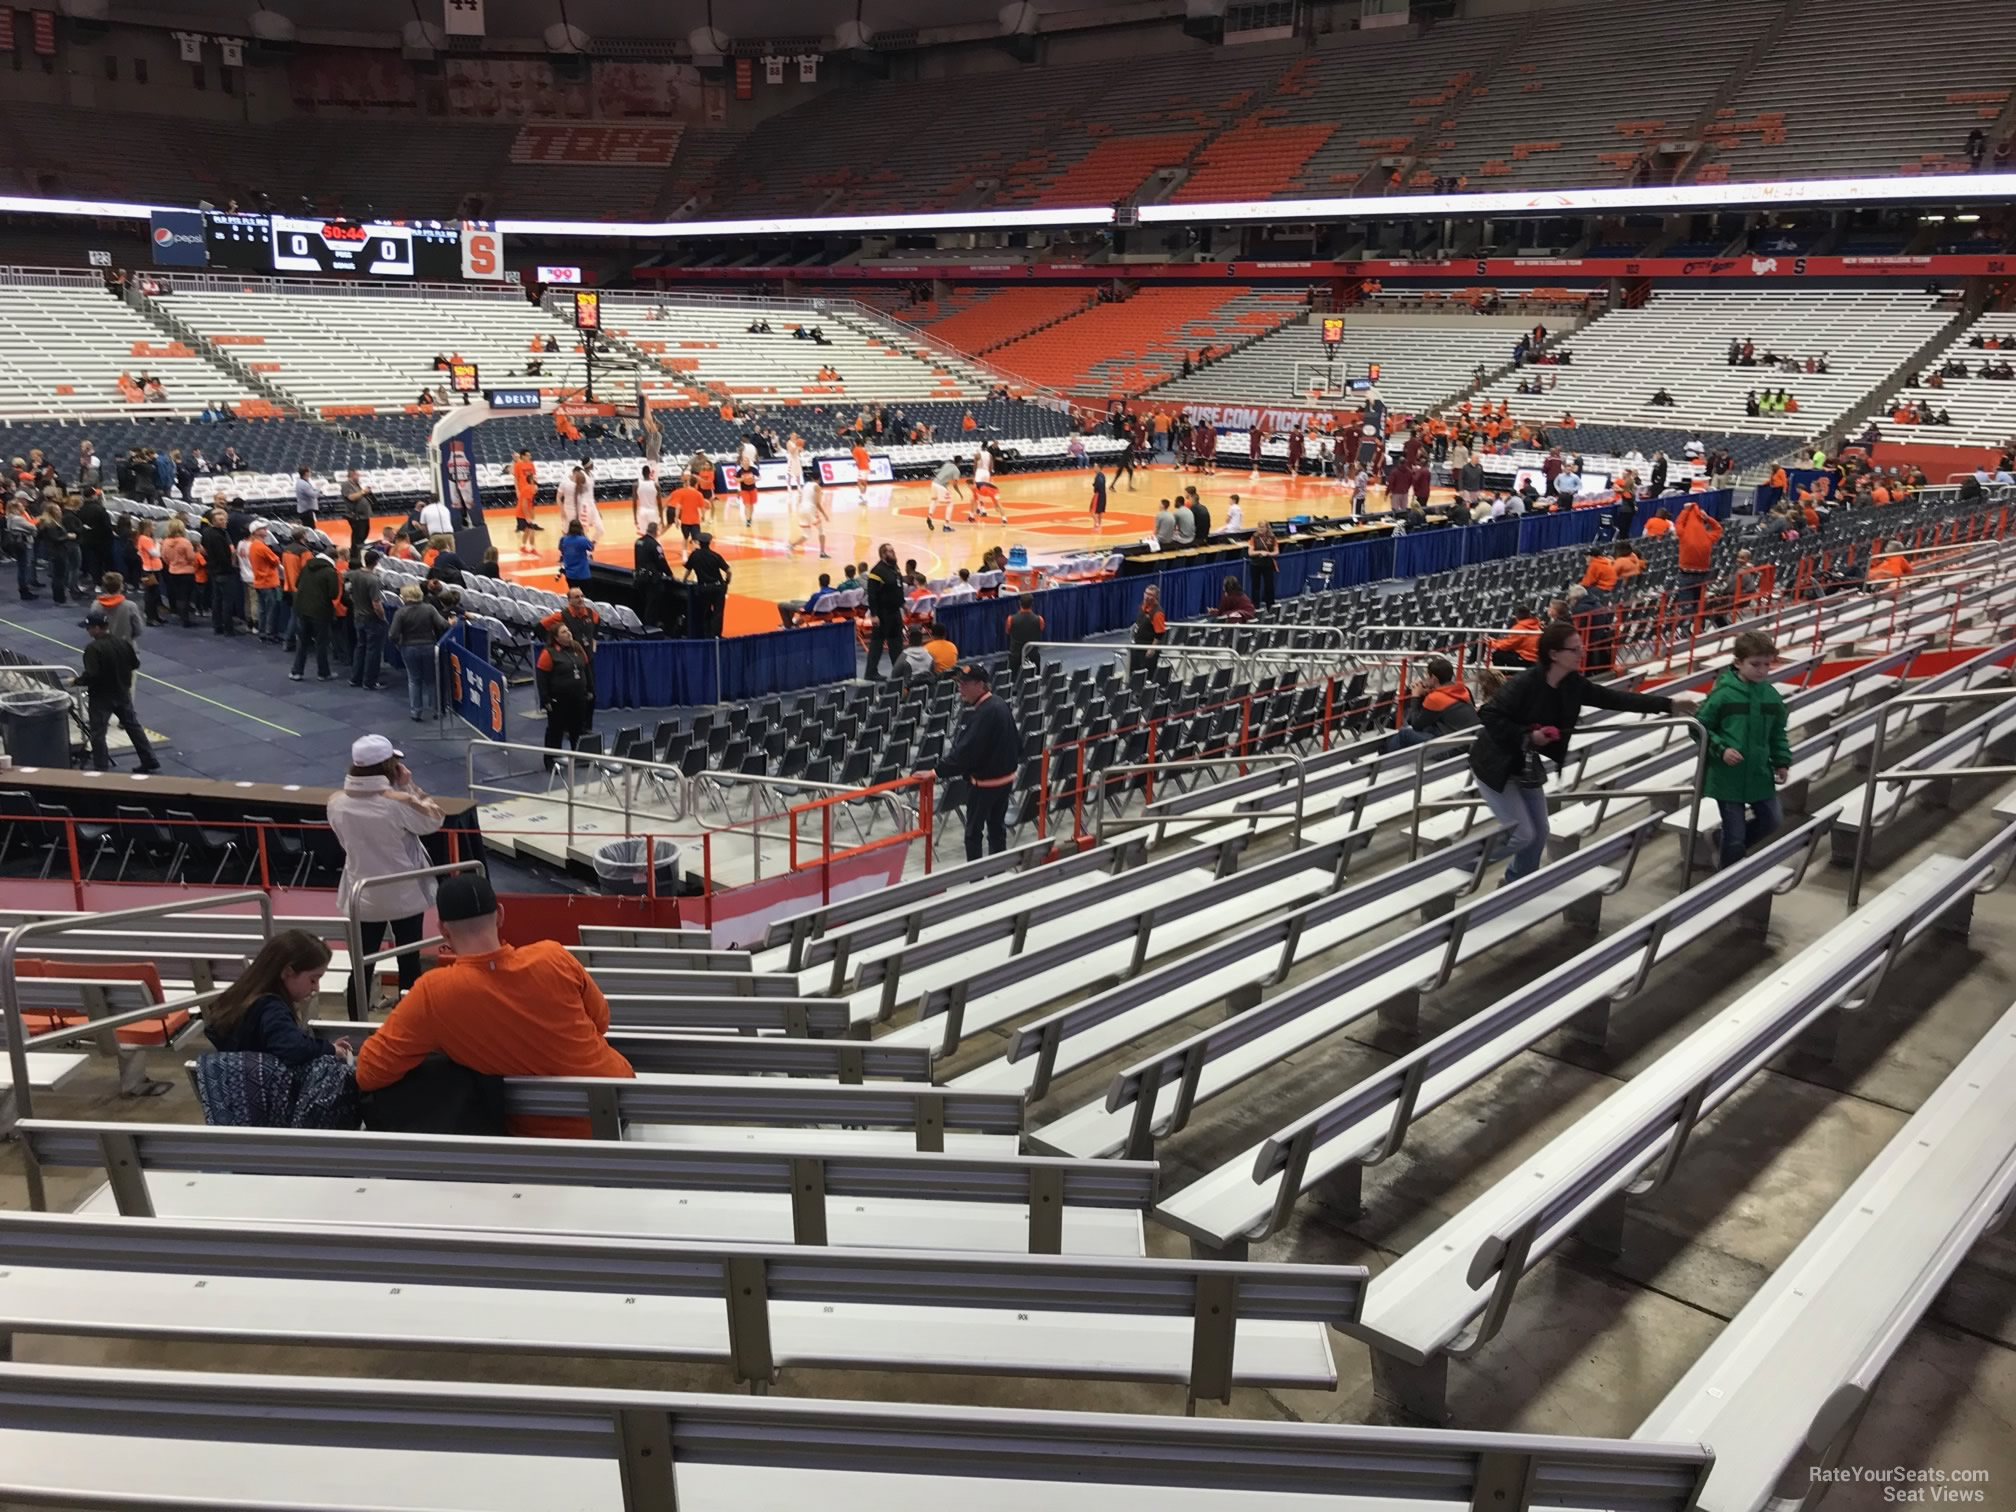 Syracuse Dome Seating Chart